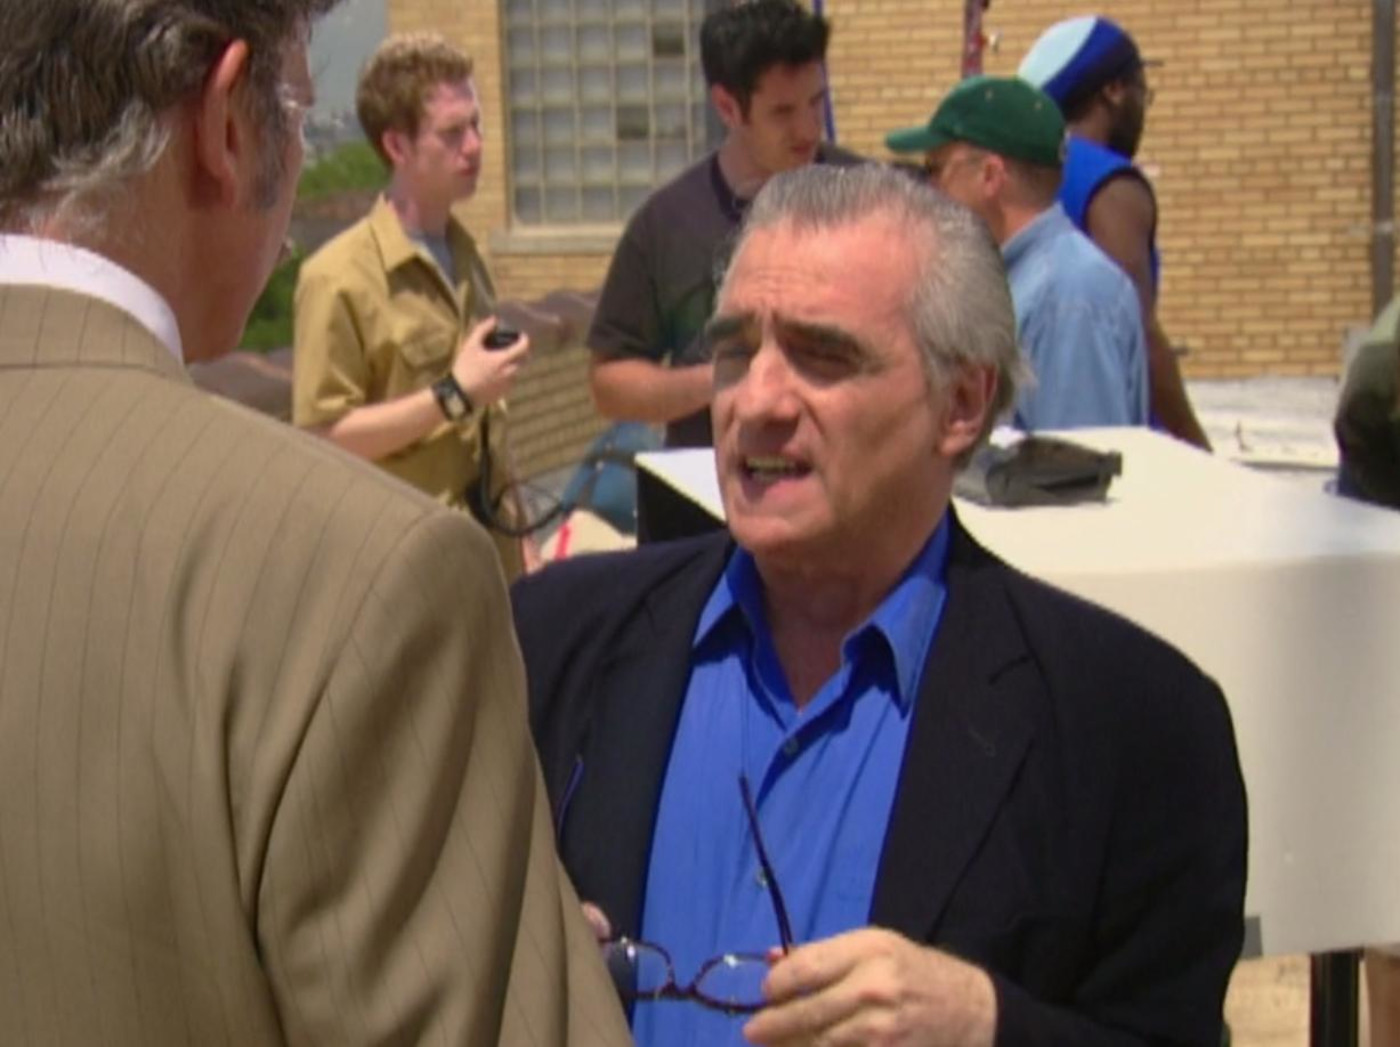 Did Martin Scorsese make an appearance in Curb Your Enthusiasm?